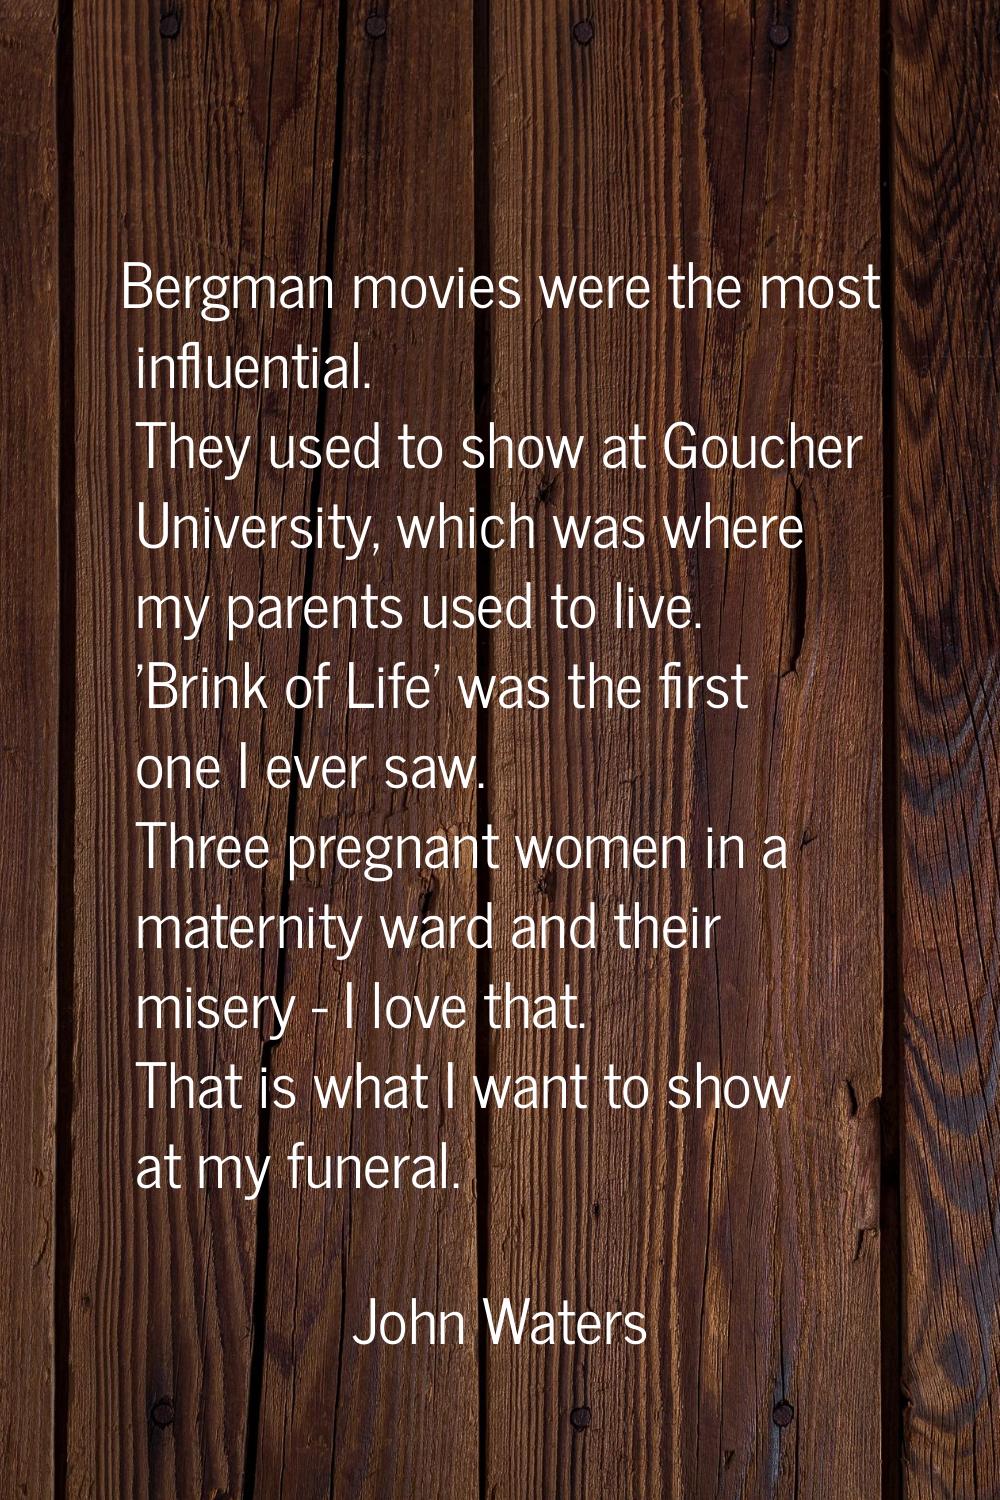 Bergman movies were the most influential. They used to show at Goucher University, which was where 